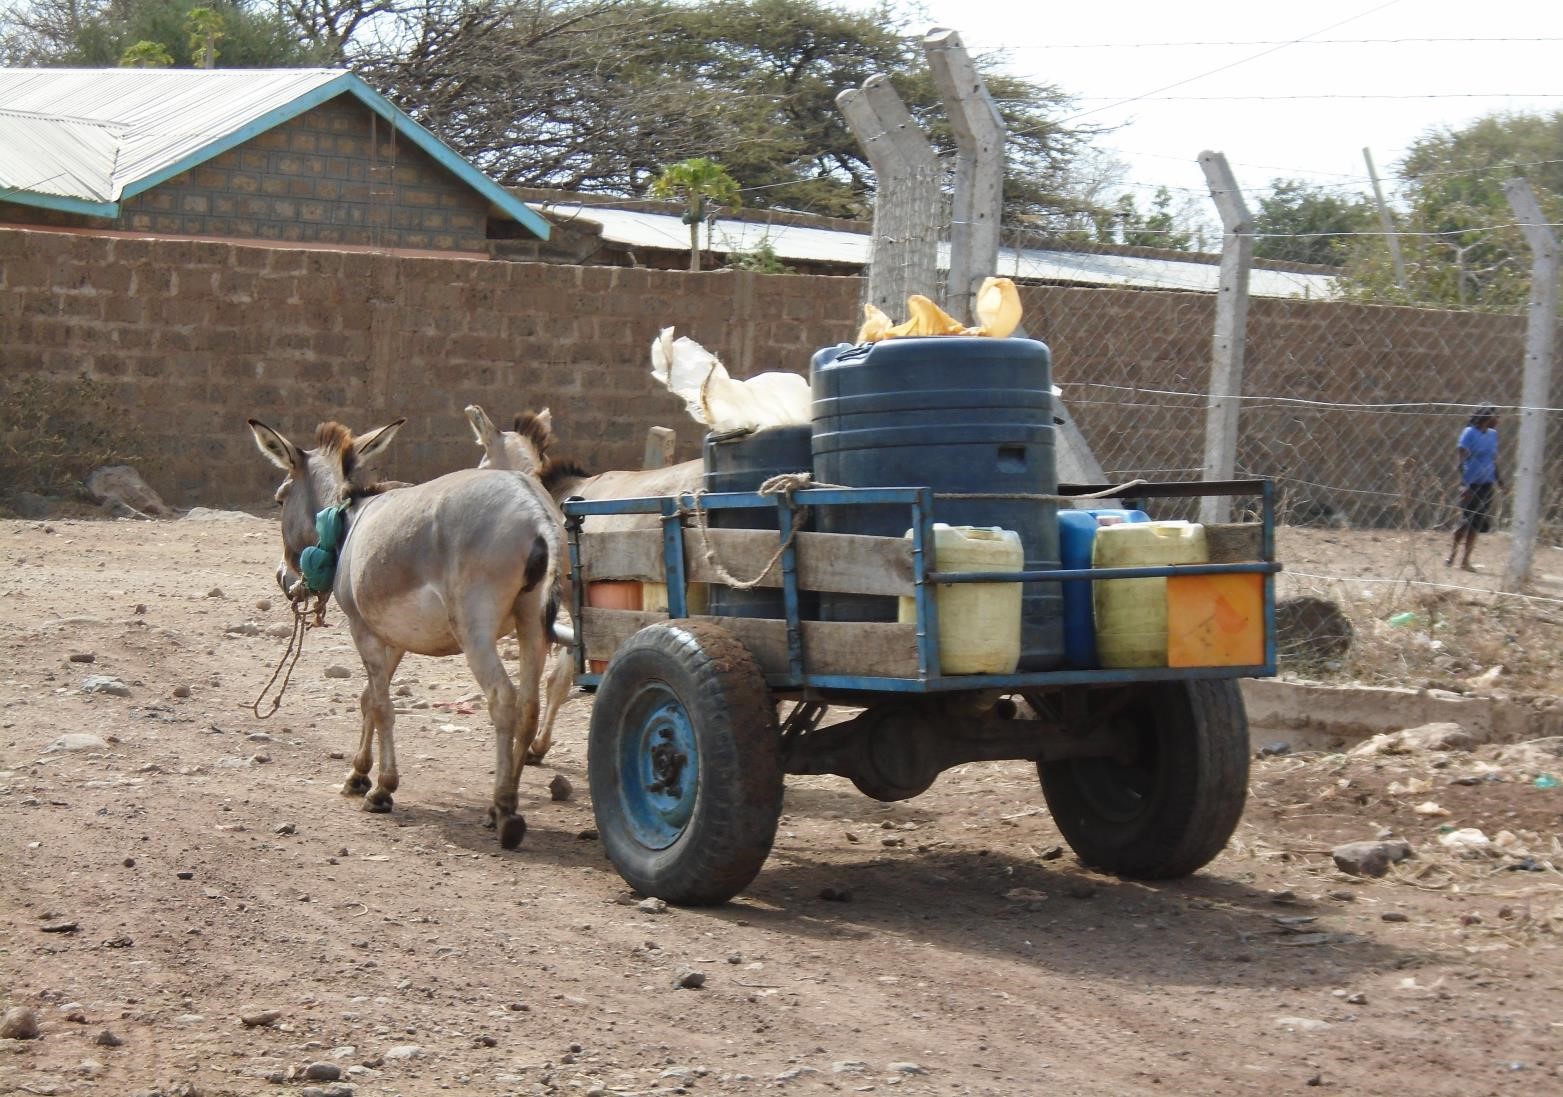 In light of recent events, OIE highlights activities to protect donkey  health and welfare. - WOAH - Africa